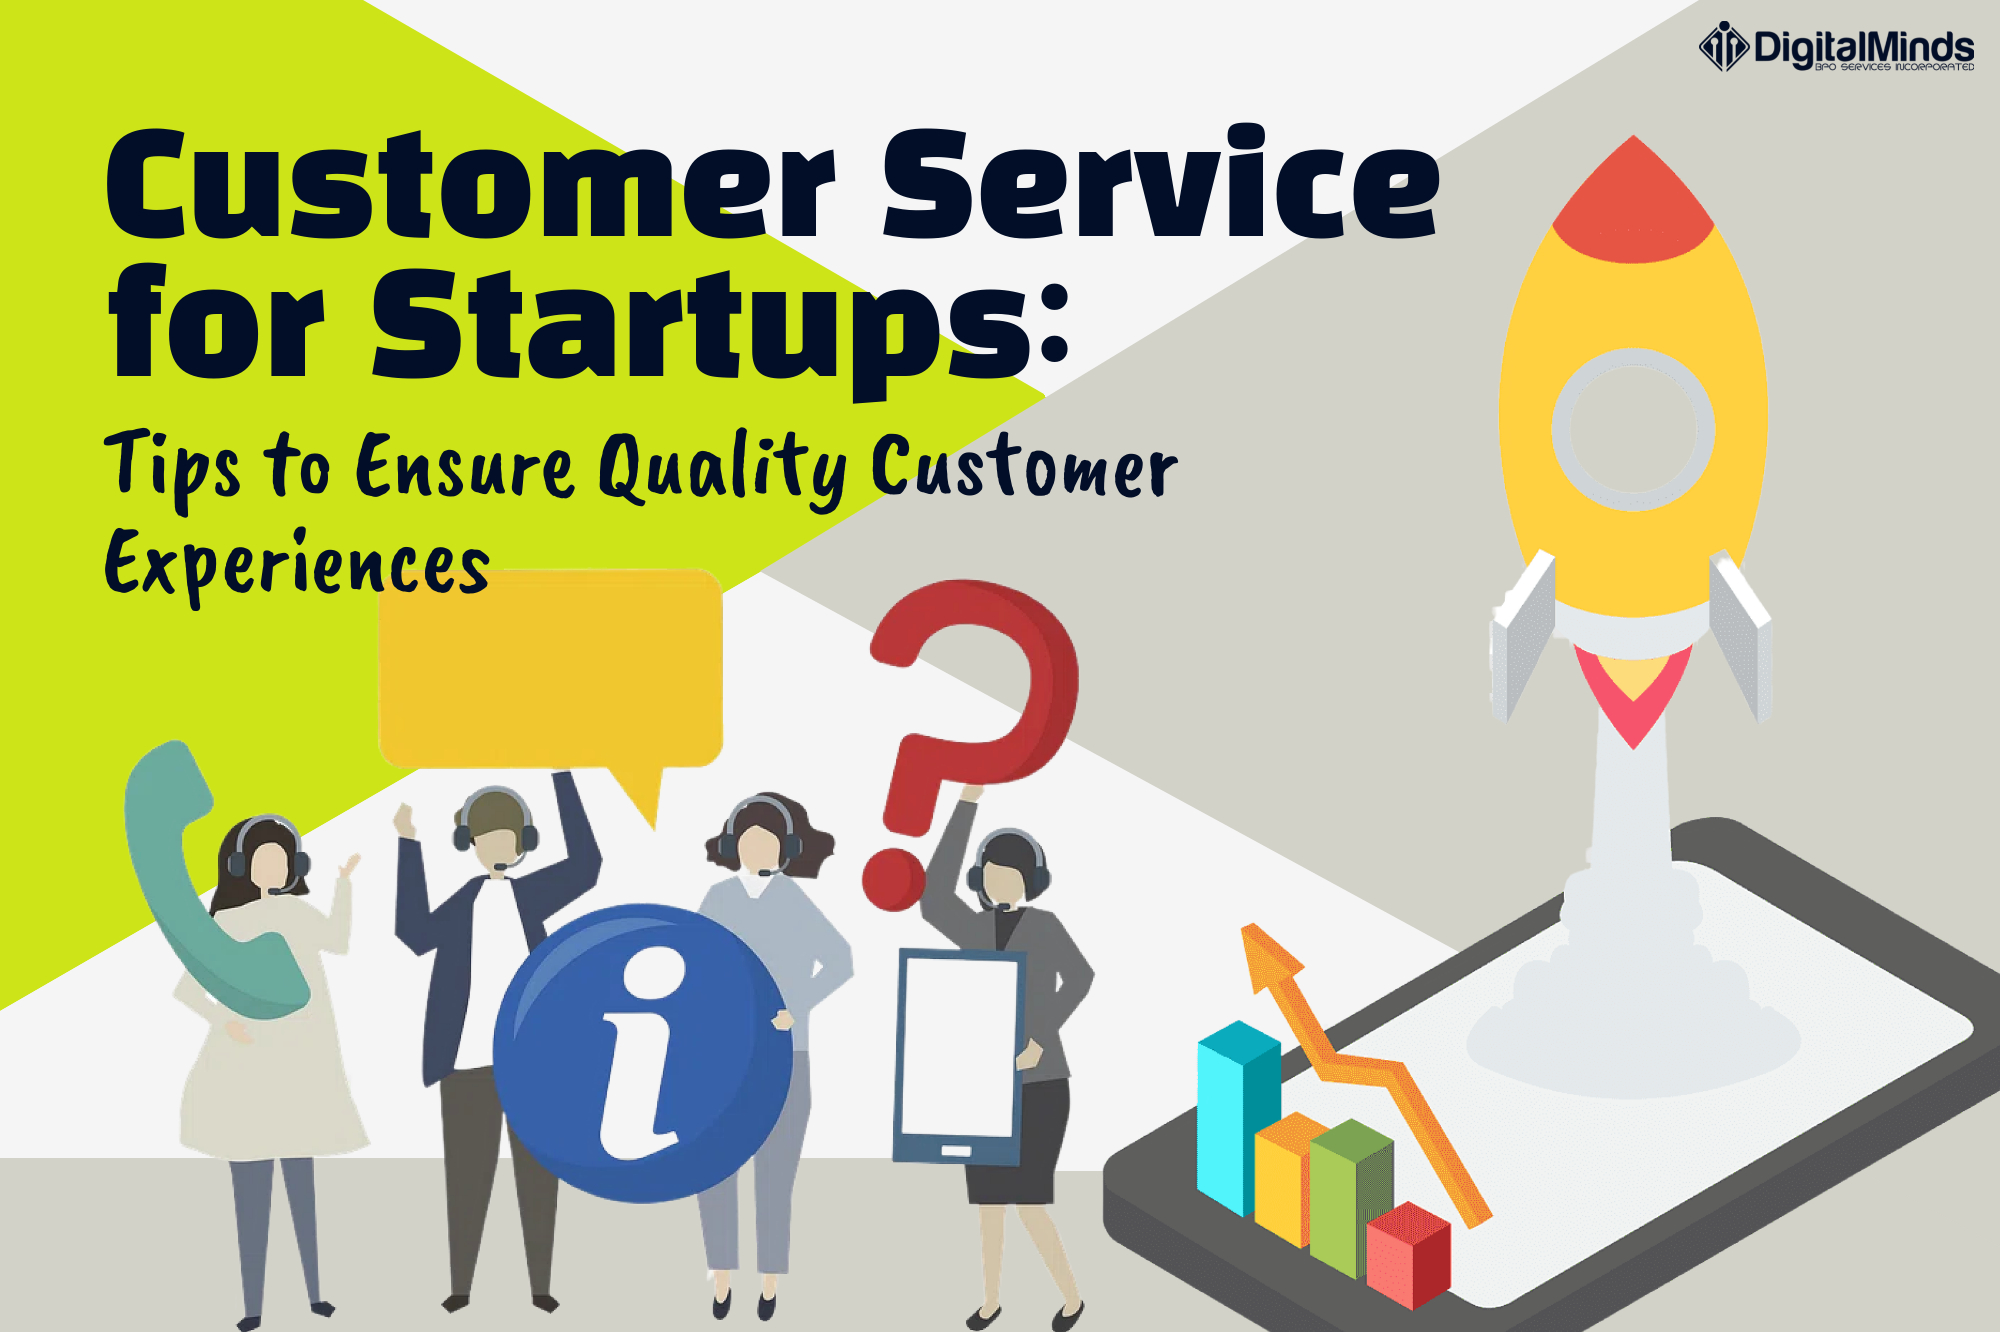 Customer service for startups tips to ensure quality customer experiences.